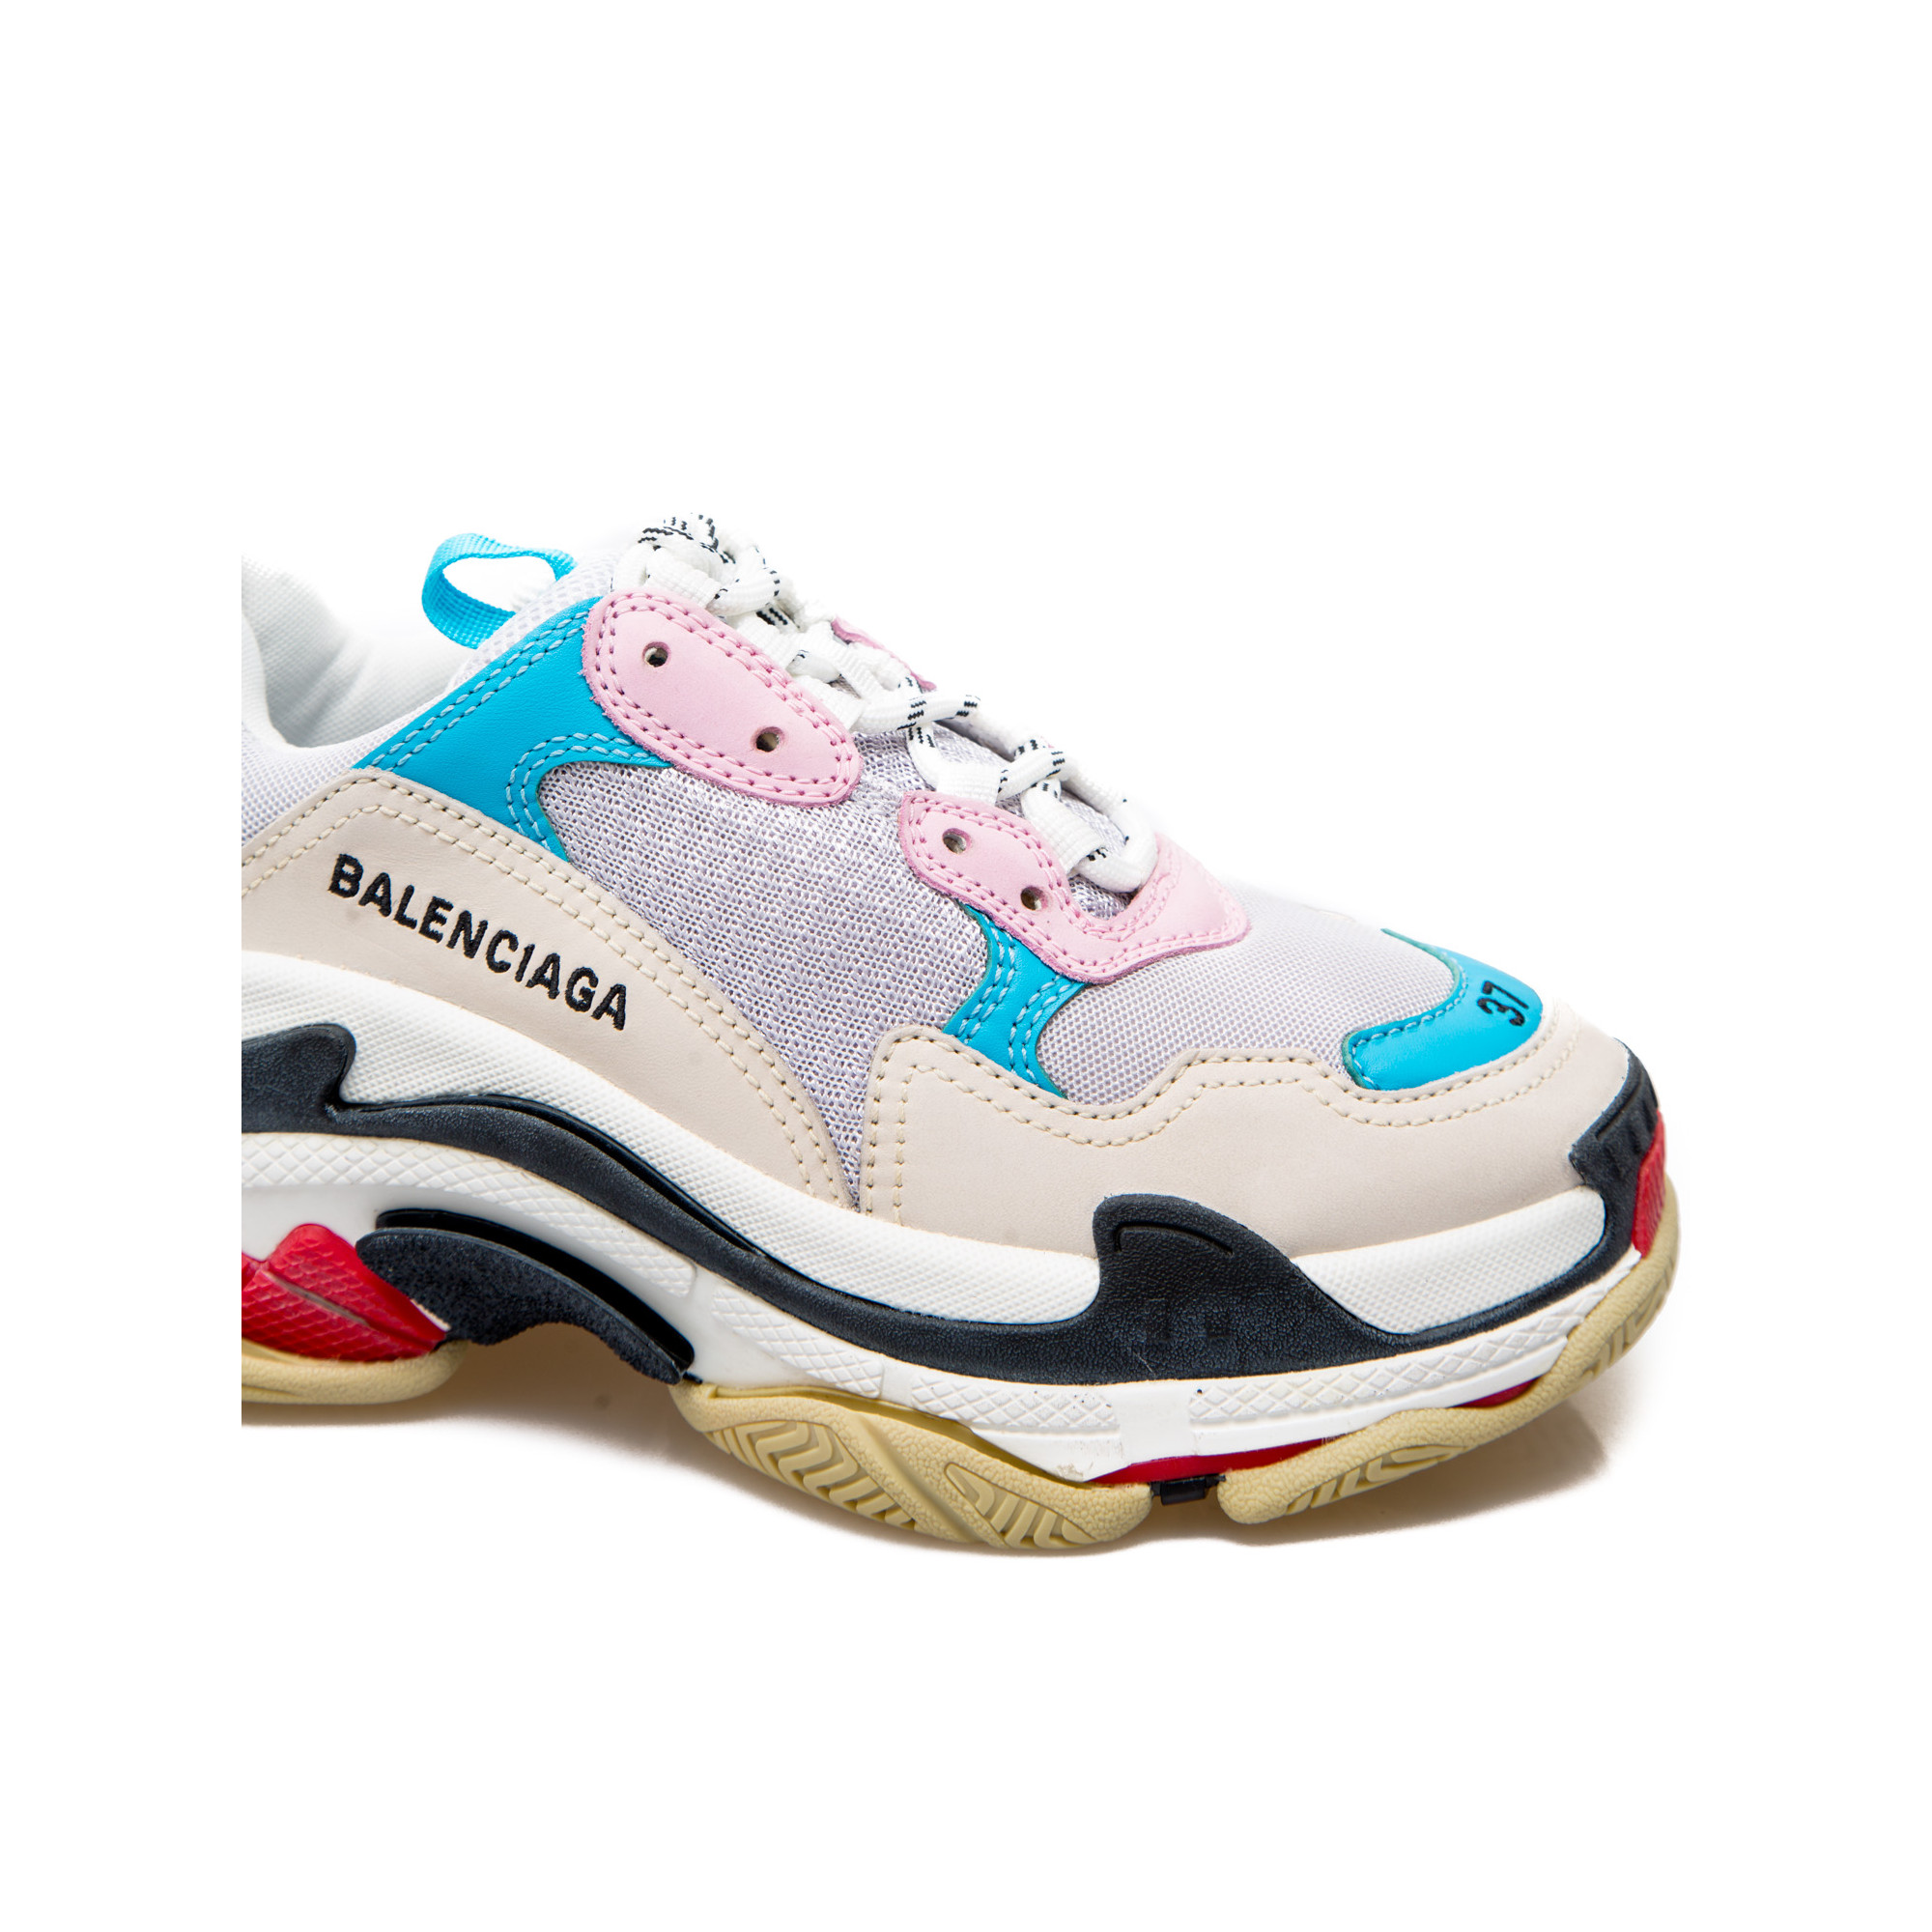 Balenciaga s Triple S trainer was buzzing all 2017 and to